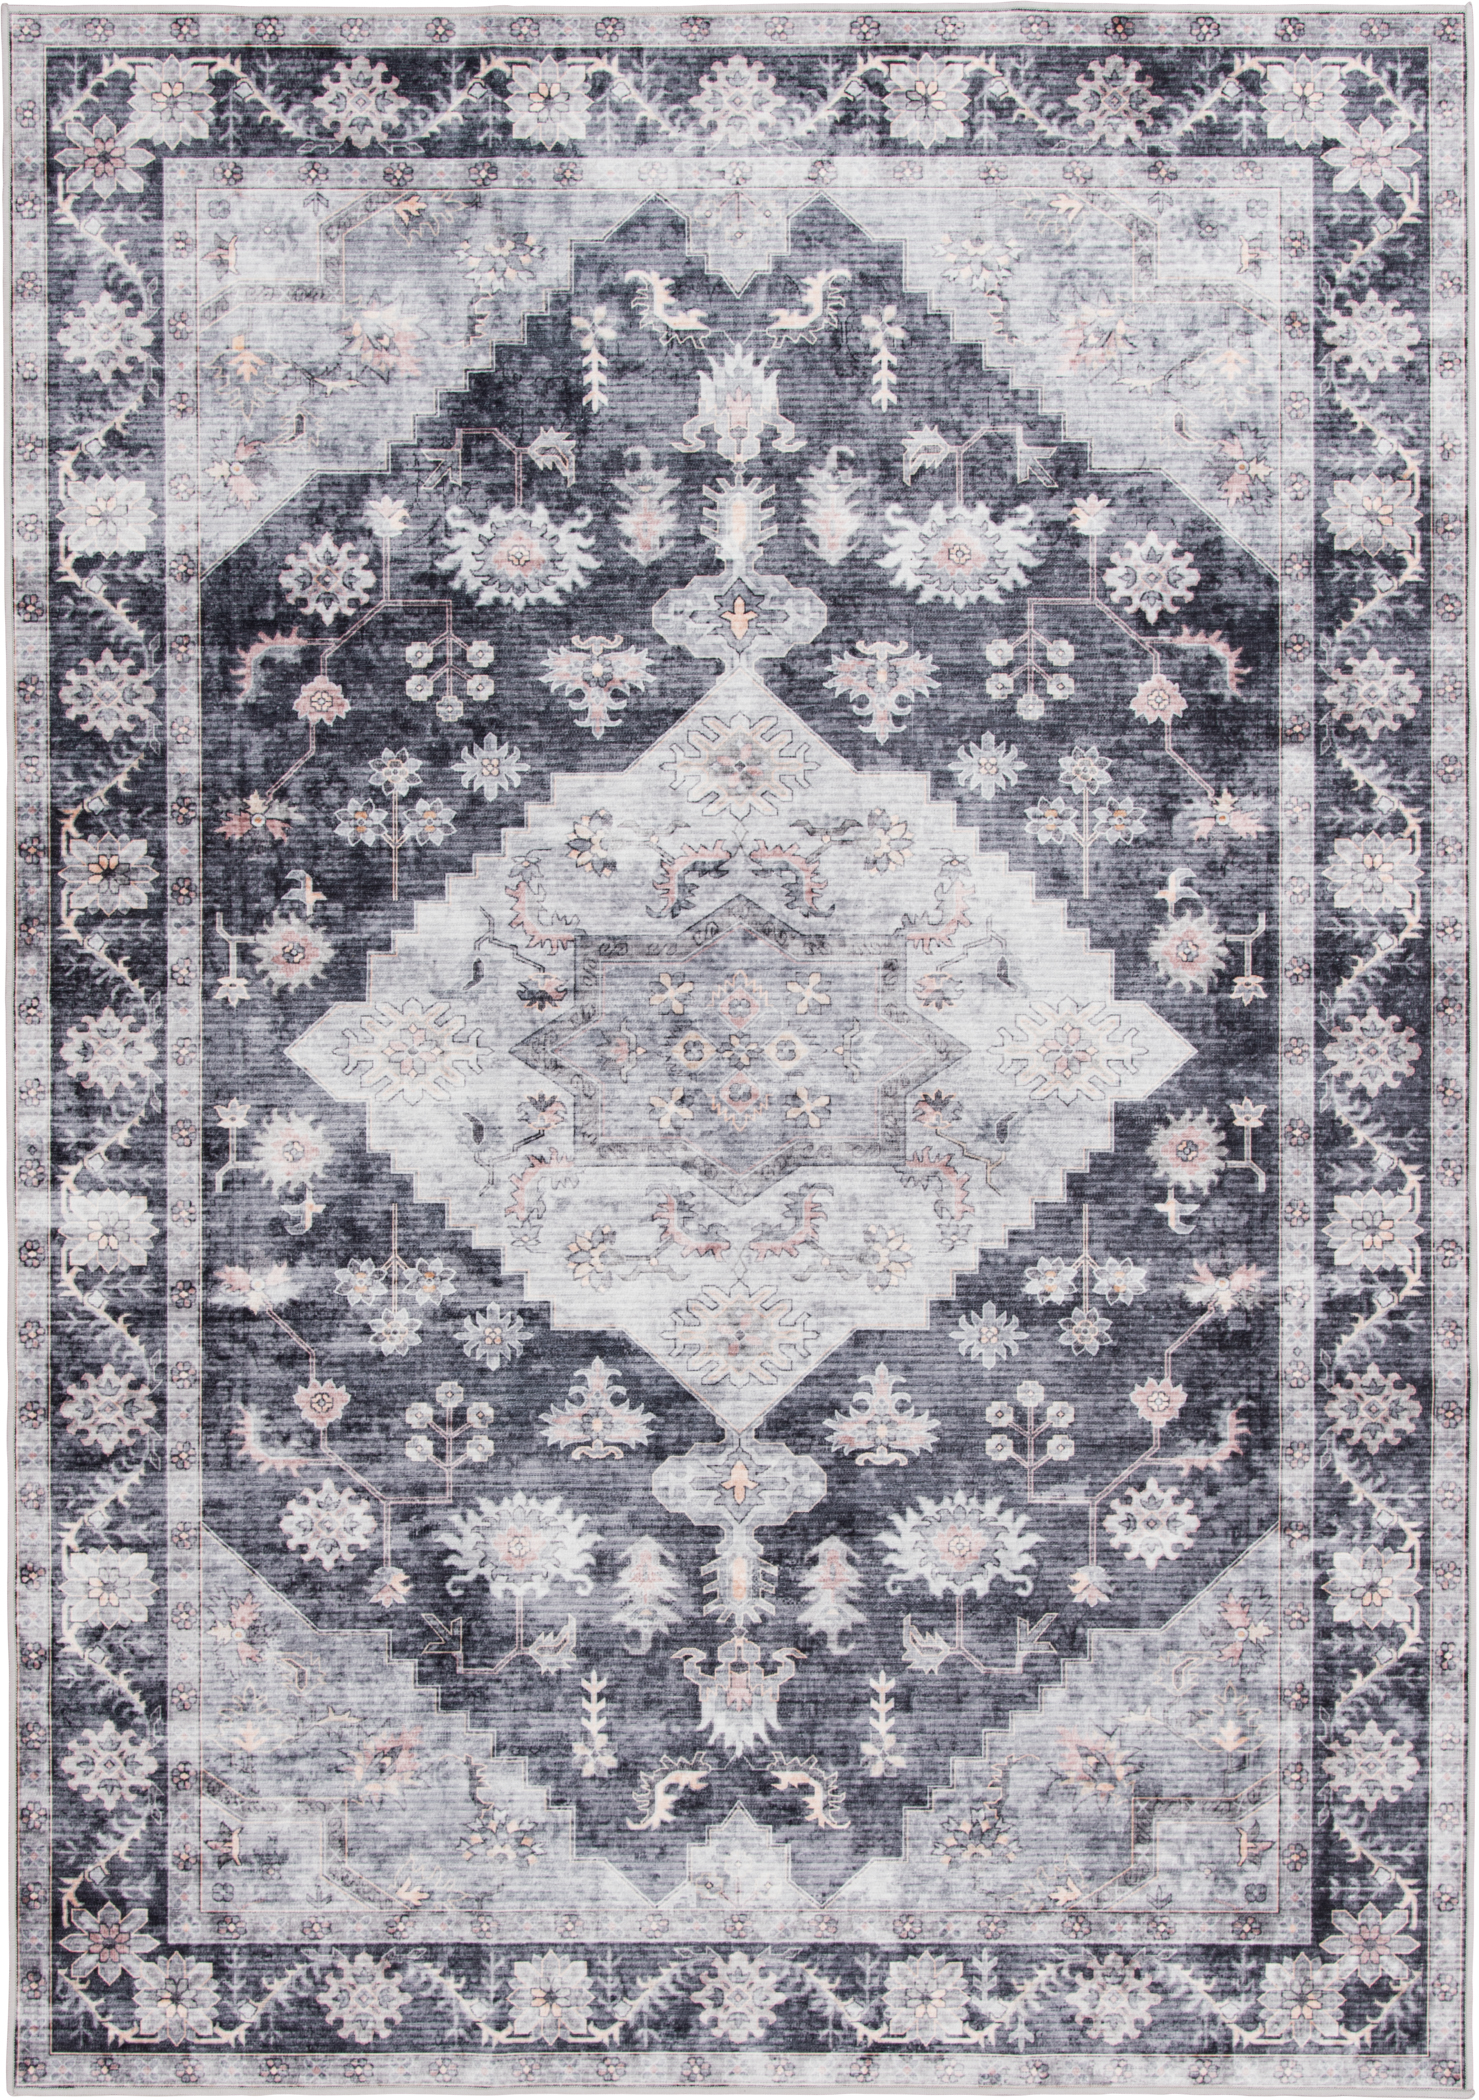 Better Homes & Gardens Persian Machine Washable Indoor Area Rug, Gray, 5'x7' - image 1 of 10